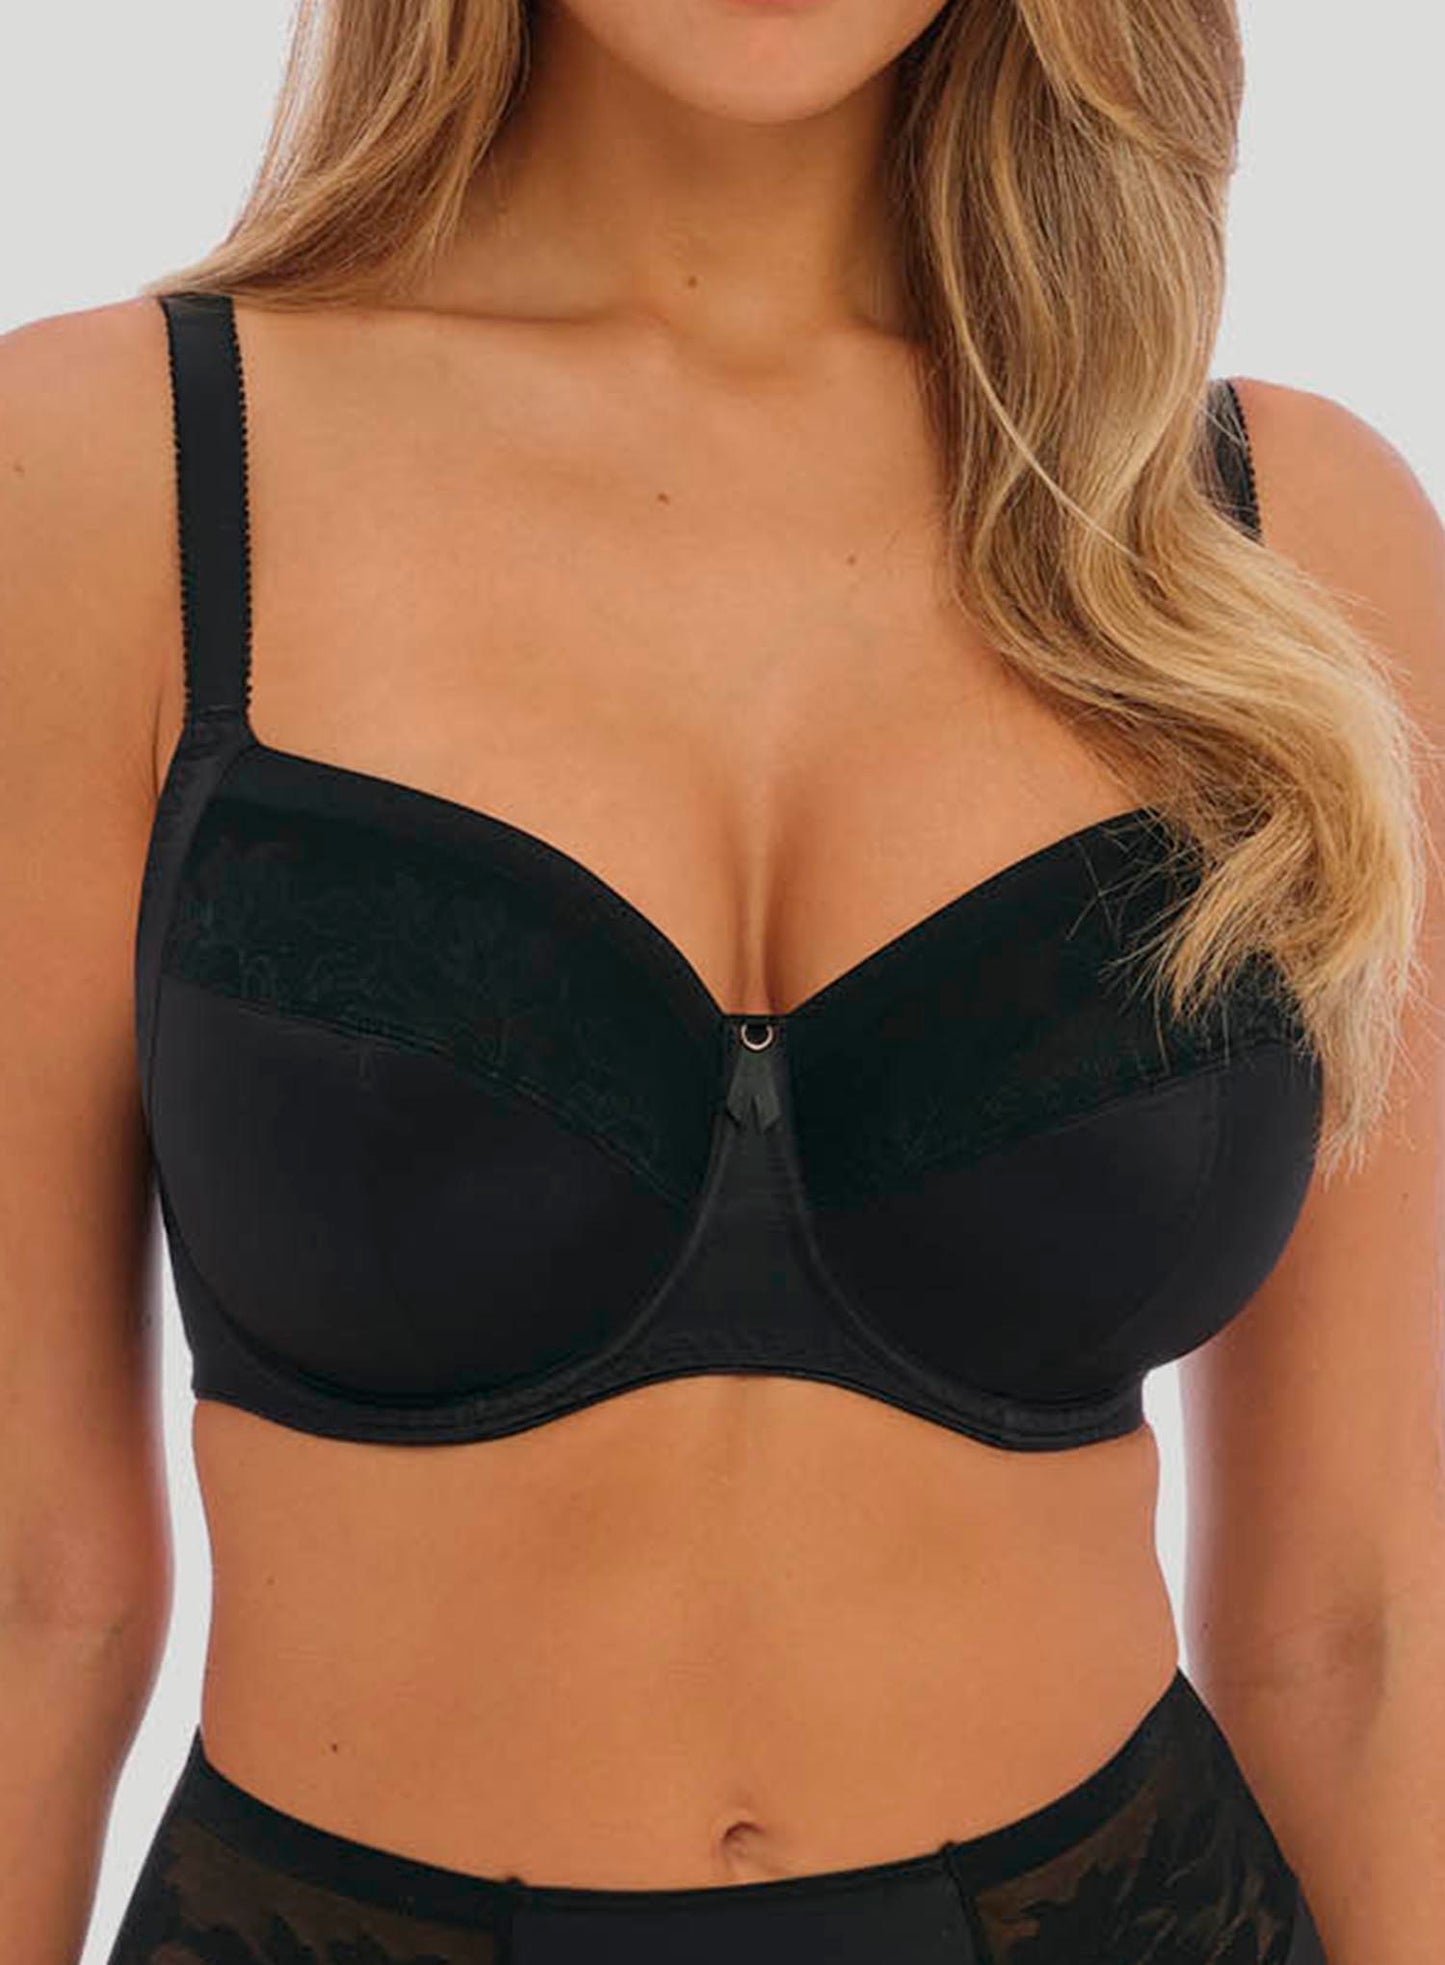 Fantasie Illusion Underwire Side Support Bra in Berry - Busted Bra